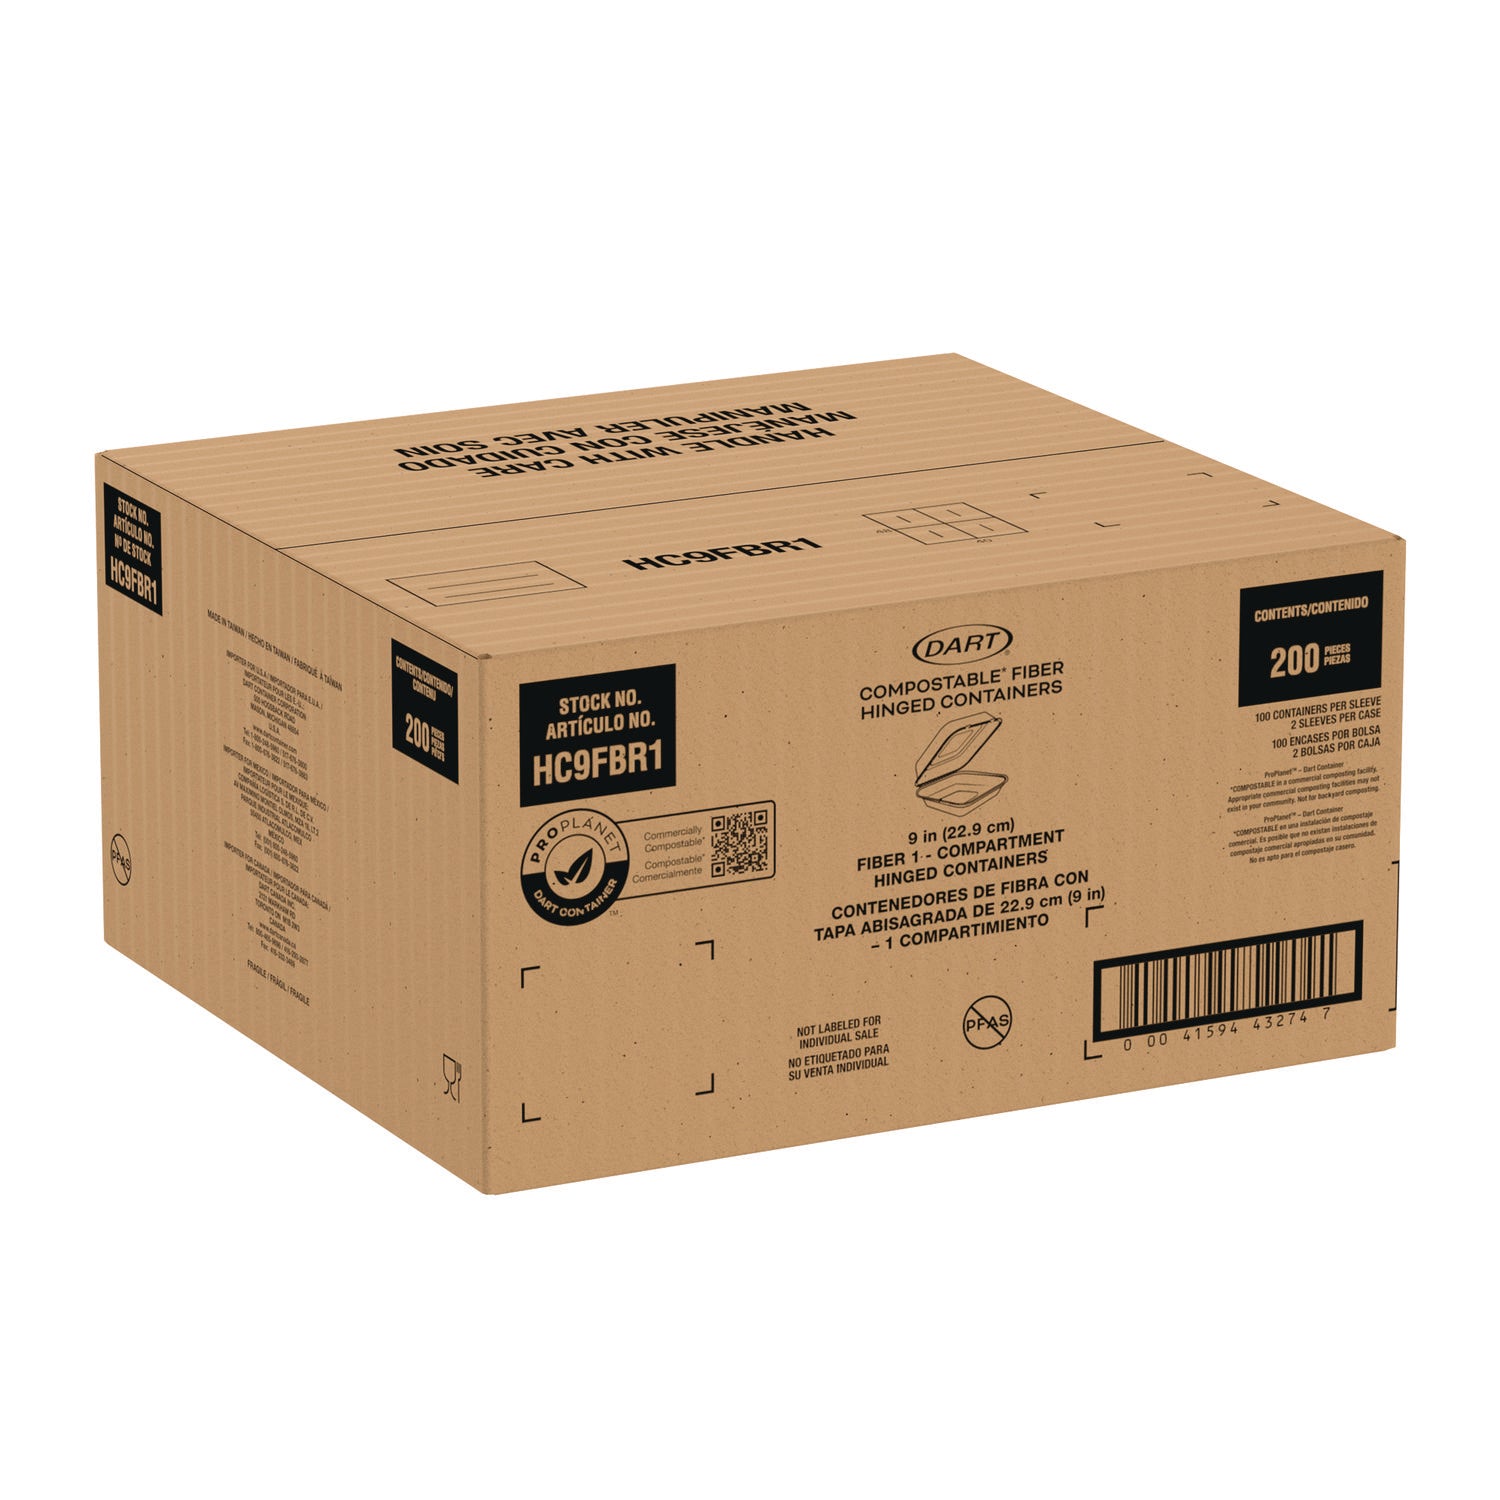 compostable-fiber-hinged-trays-proplanet-seal-898-x-935-x-217-ivory-molded-fiber-200-carton_dcchc9fbr1 - 3